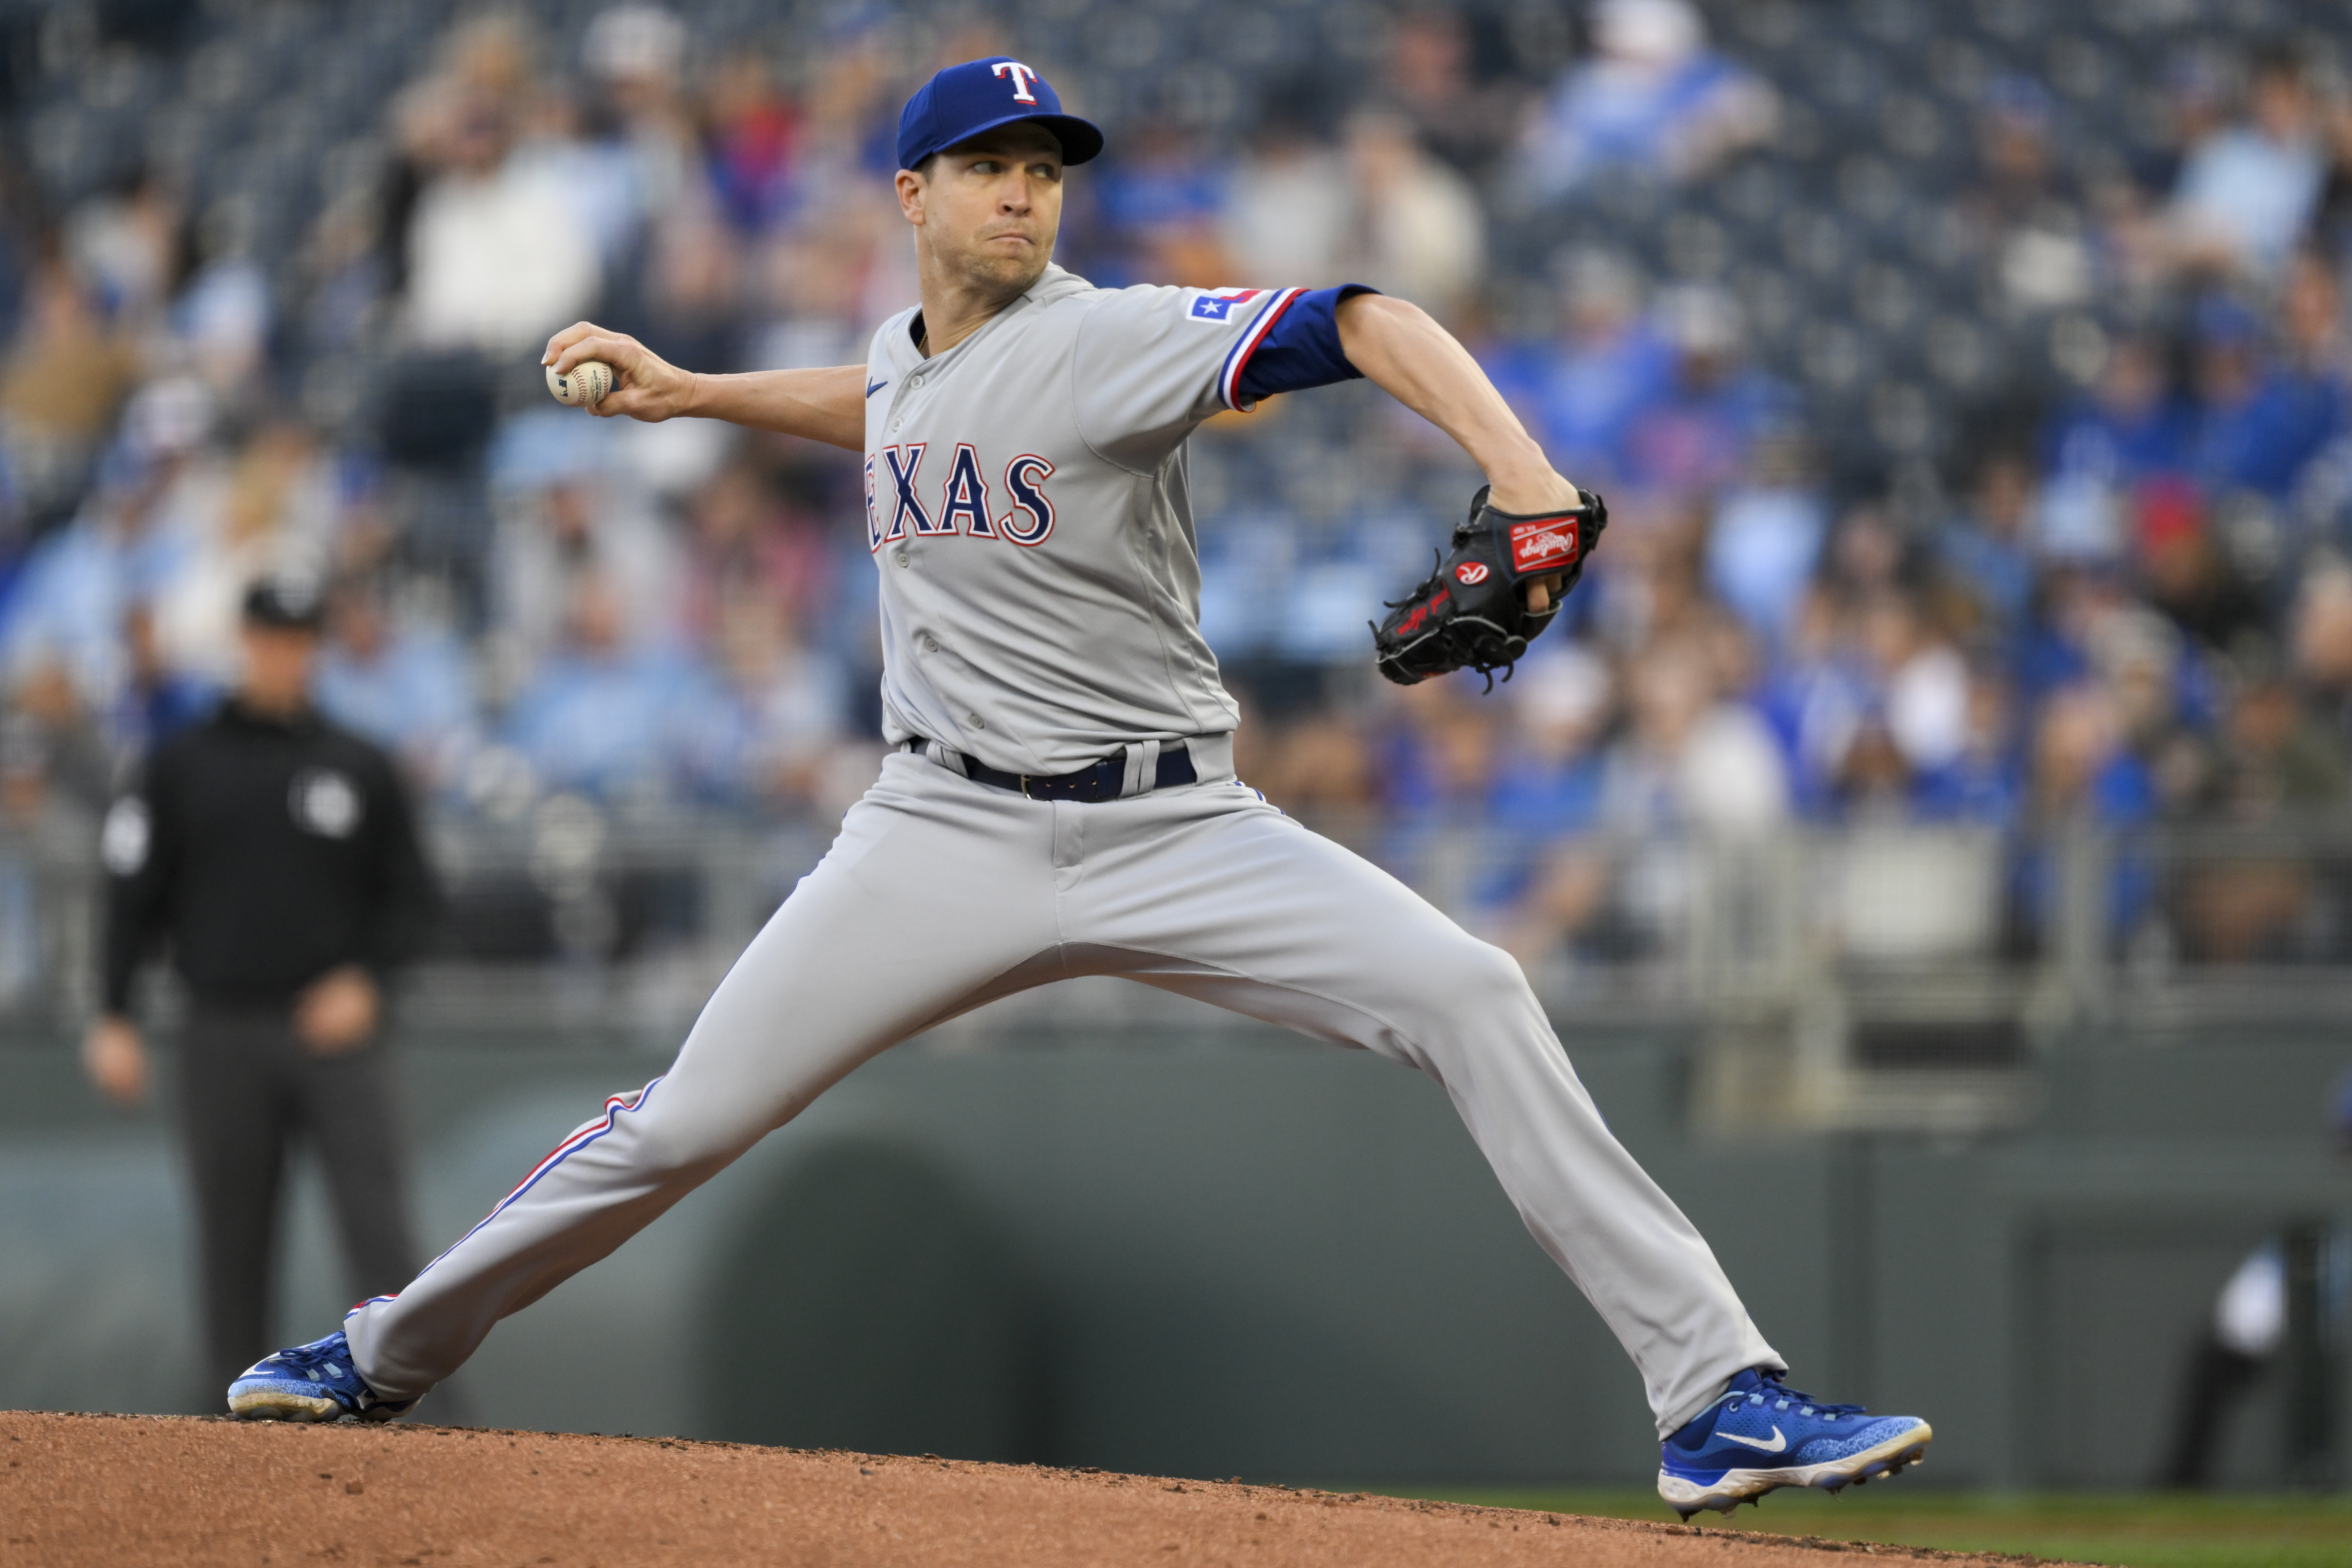 Jacob DeGrom Throws 2nd Bullpen With Texas Rangers